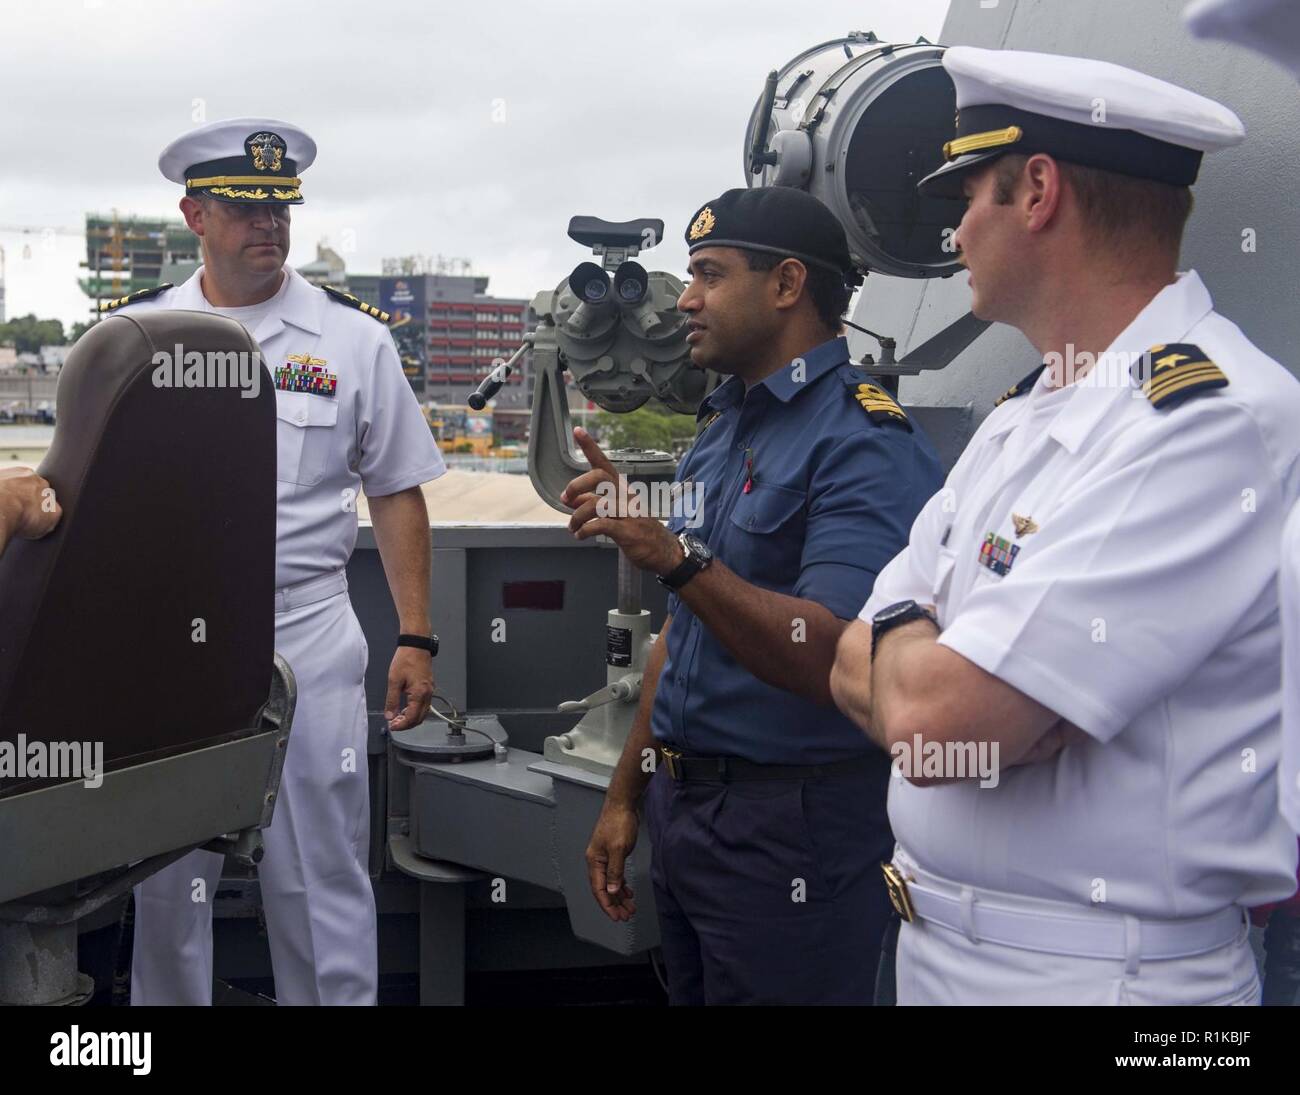 PORT OF SUVA, Fiji (Oct. 14, 2018) Cmdr. Andy Strickland, commanding officer of Arleigh Burke-class guided-missile destroyer USS Shoup (DDG 86), listens to Cmdr. Ledua Yaco, Republic of Fiji Military Forces, and Lt. Cmdr. William Hinson, on the bridgewing as the ship pulls into the Port of Suva, Fiji Oct. 14, 2018. Shoup is currently participating in the Oceania Maritime Security Initiative (OMSI) program, a Secretary of Defense program leveraging Department of Defense assets transiting the region to increase the Coast Guard’s maritime domain awareness, ultimately supporting its maritime law e Stock Photo